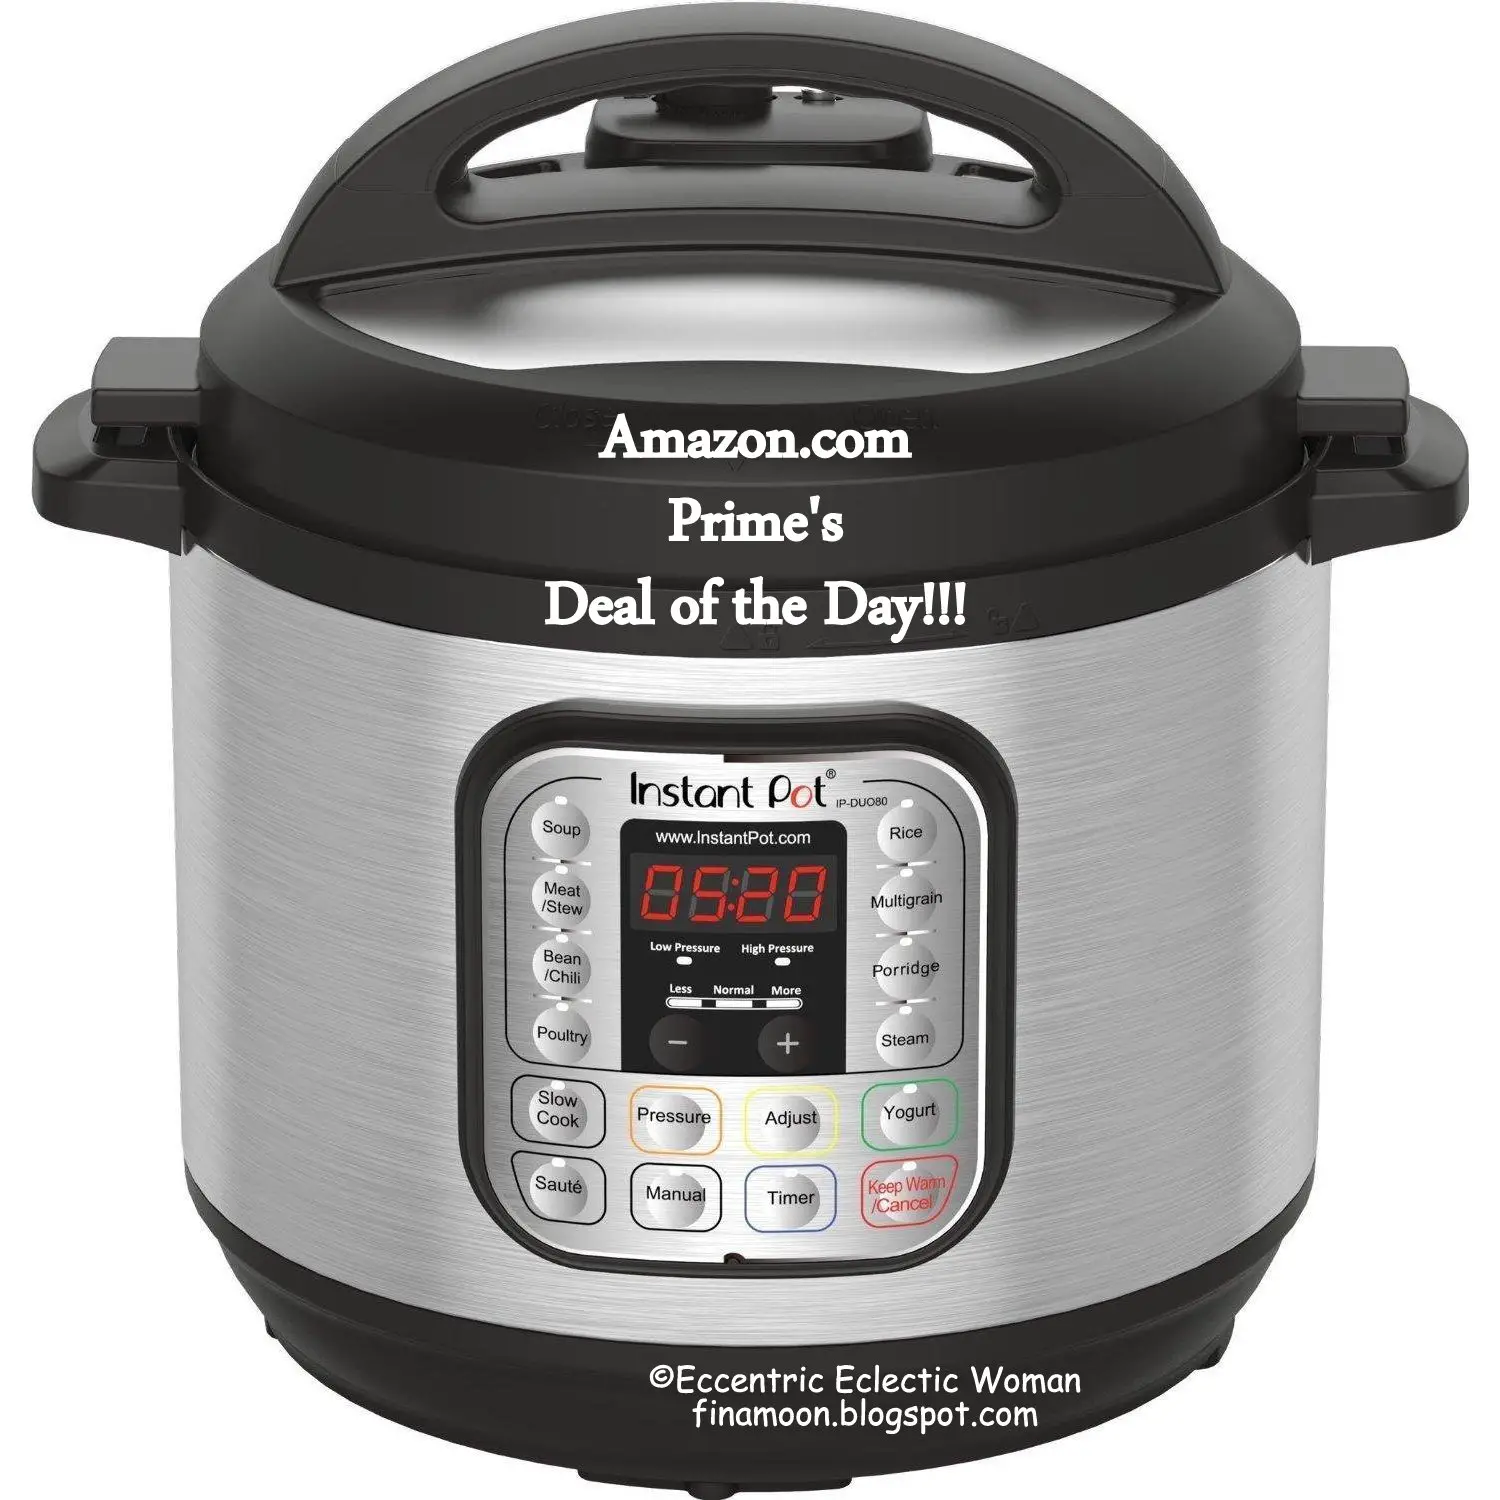 Eccentric Eclectic Woman: The Instant Pot DUO is Amazon Prime